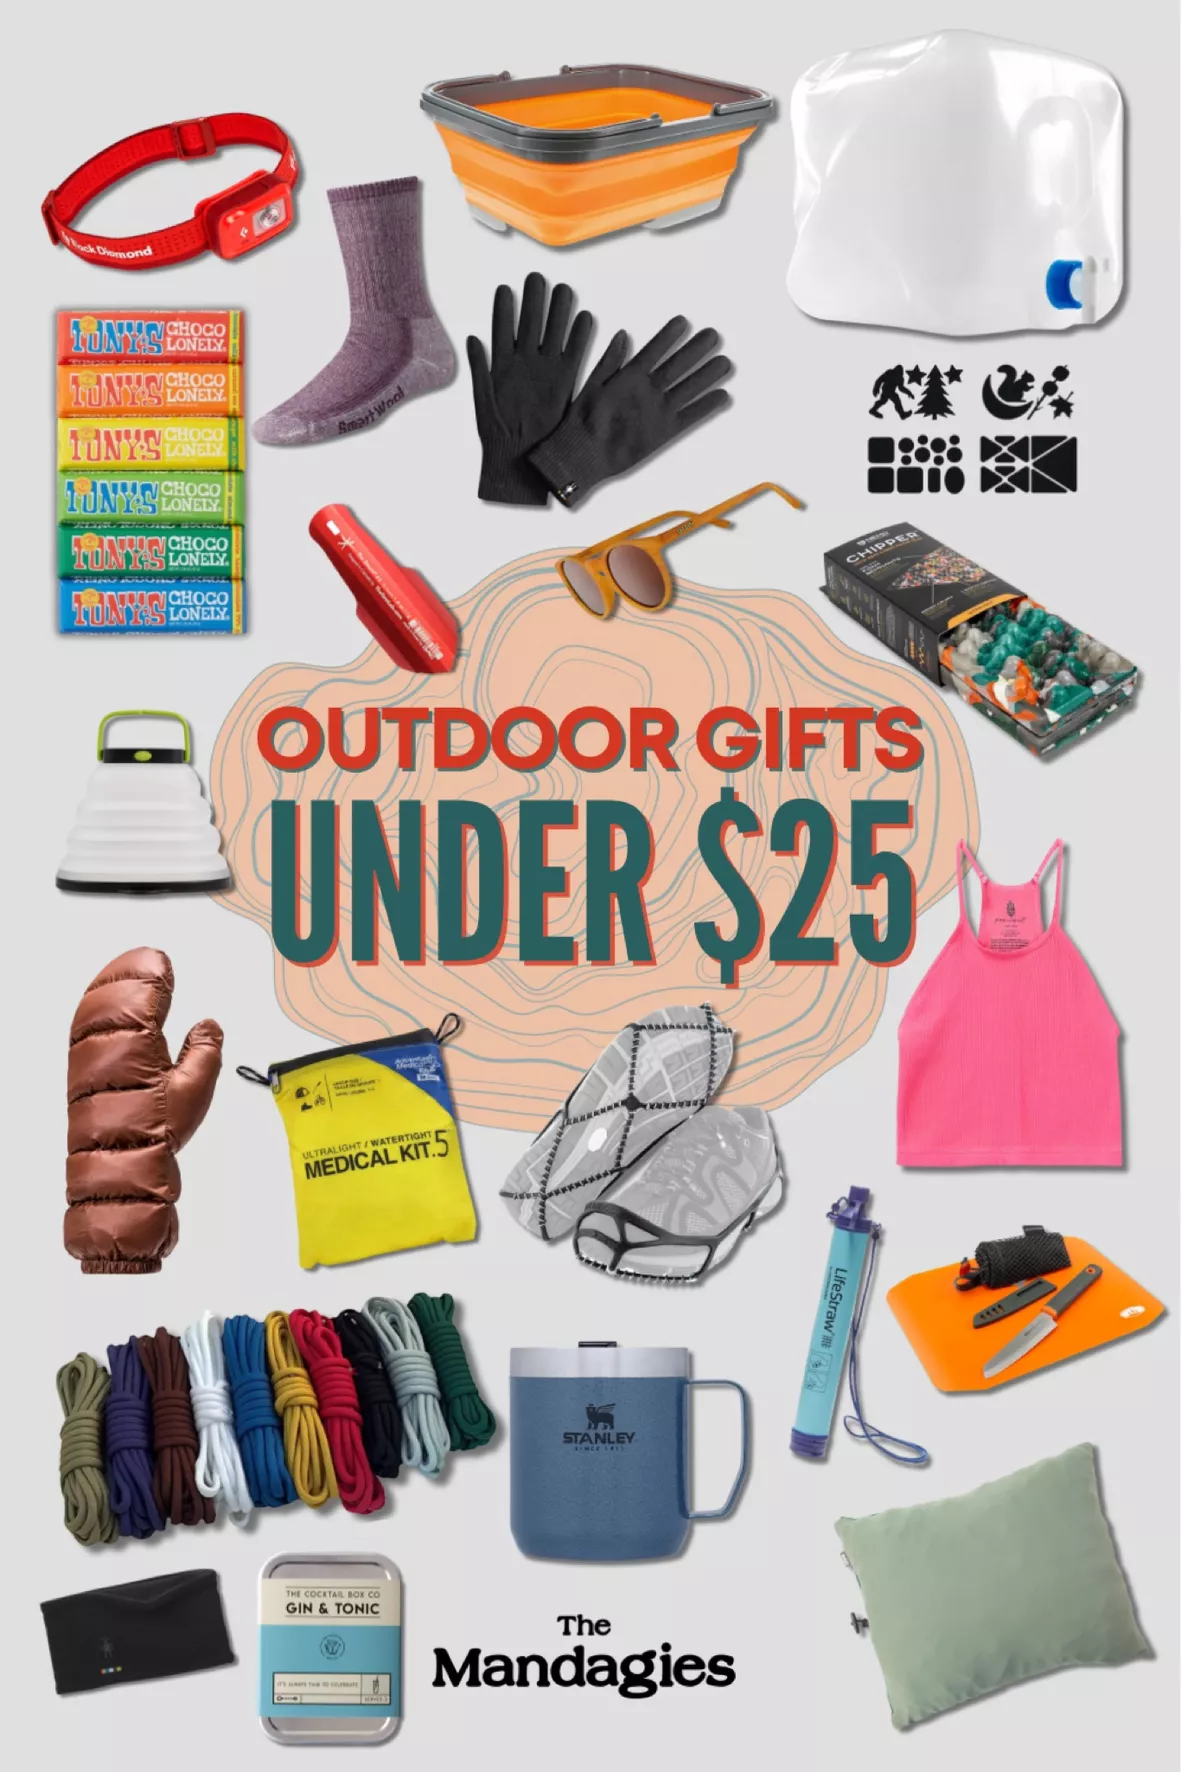 25 Easy Outdoorsy Stocking Stuffers (Gifts Under $10) - The Mandagies